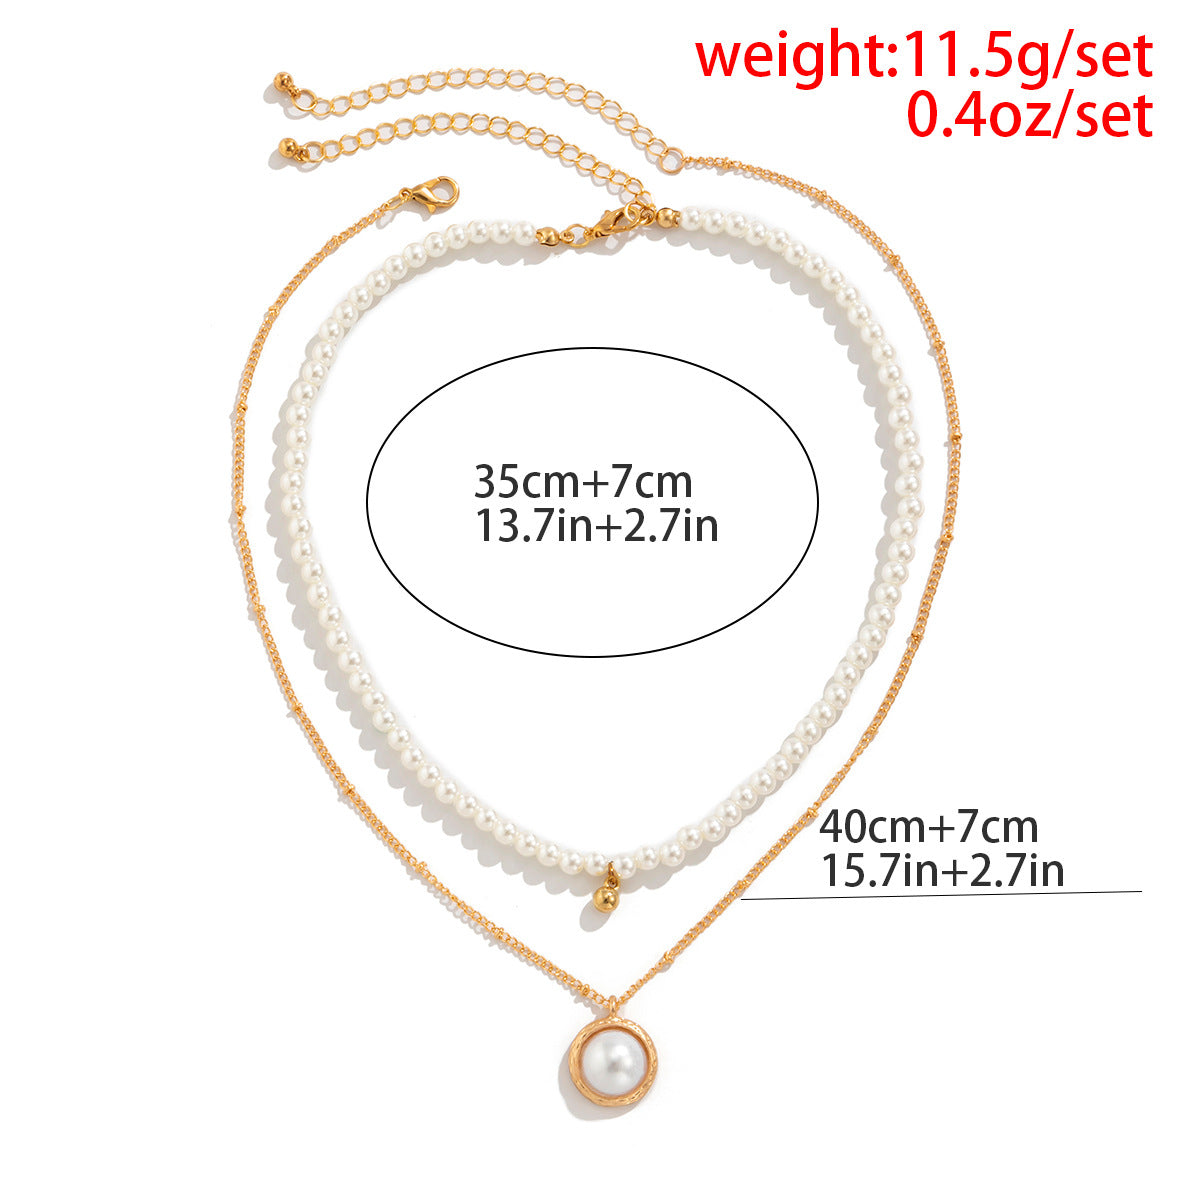 Fashion Metal Sweetheart Design Necklace for Women